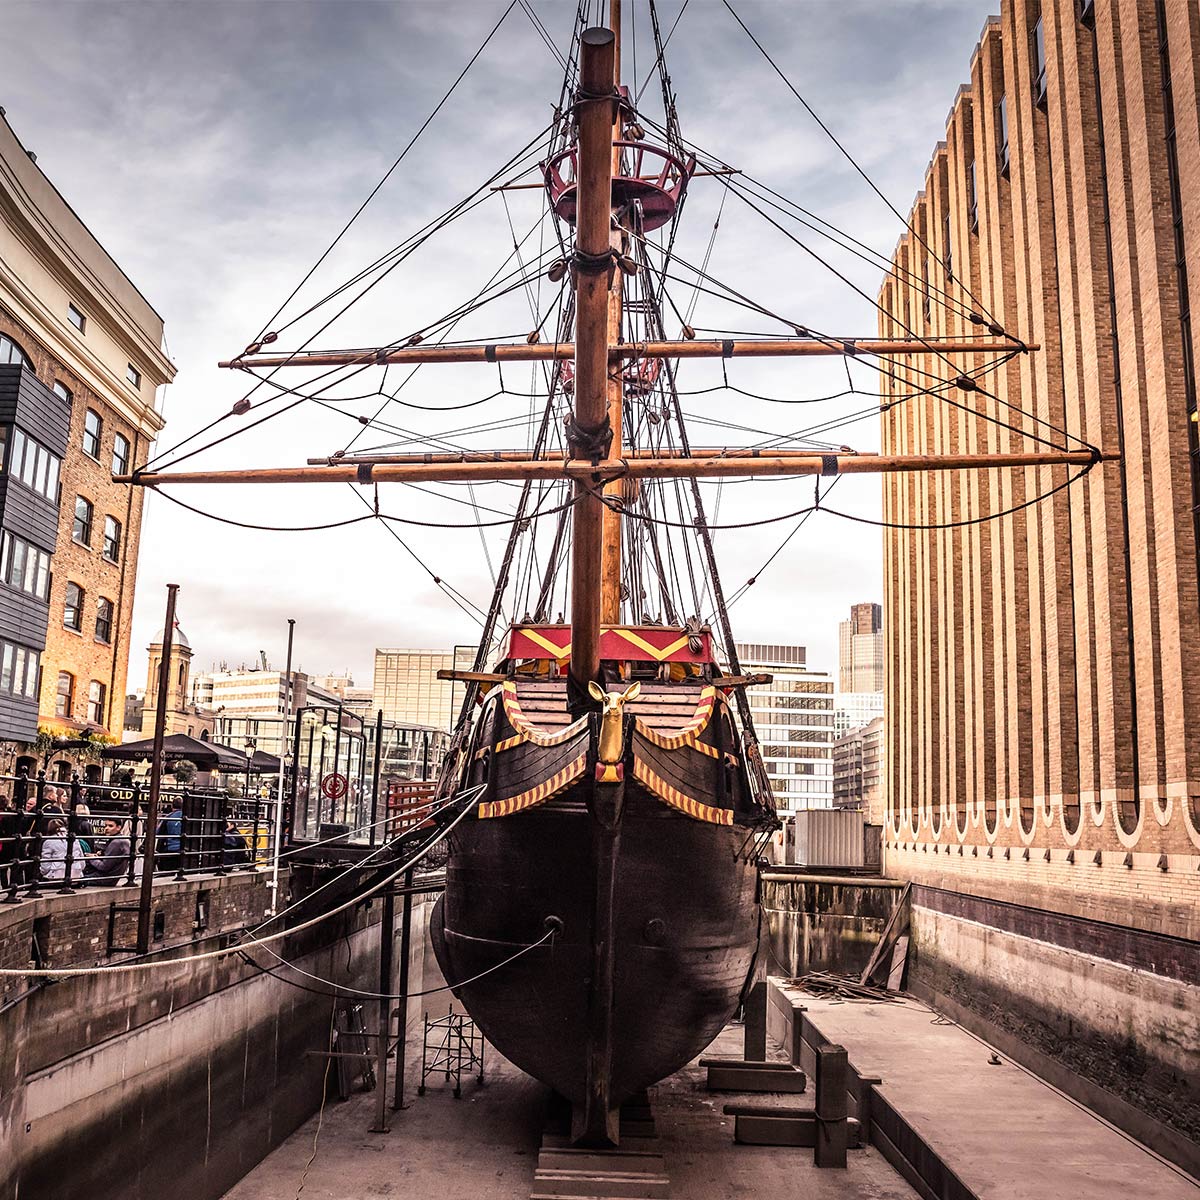 The Golden Hinde in dry dock